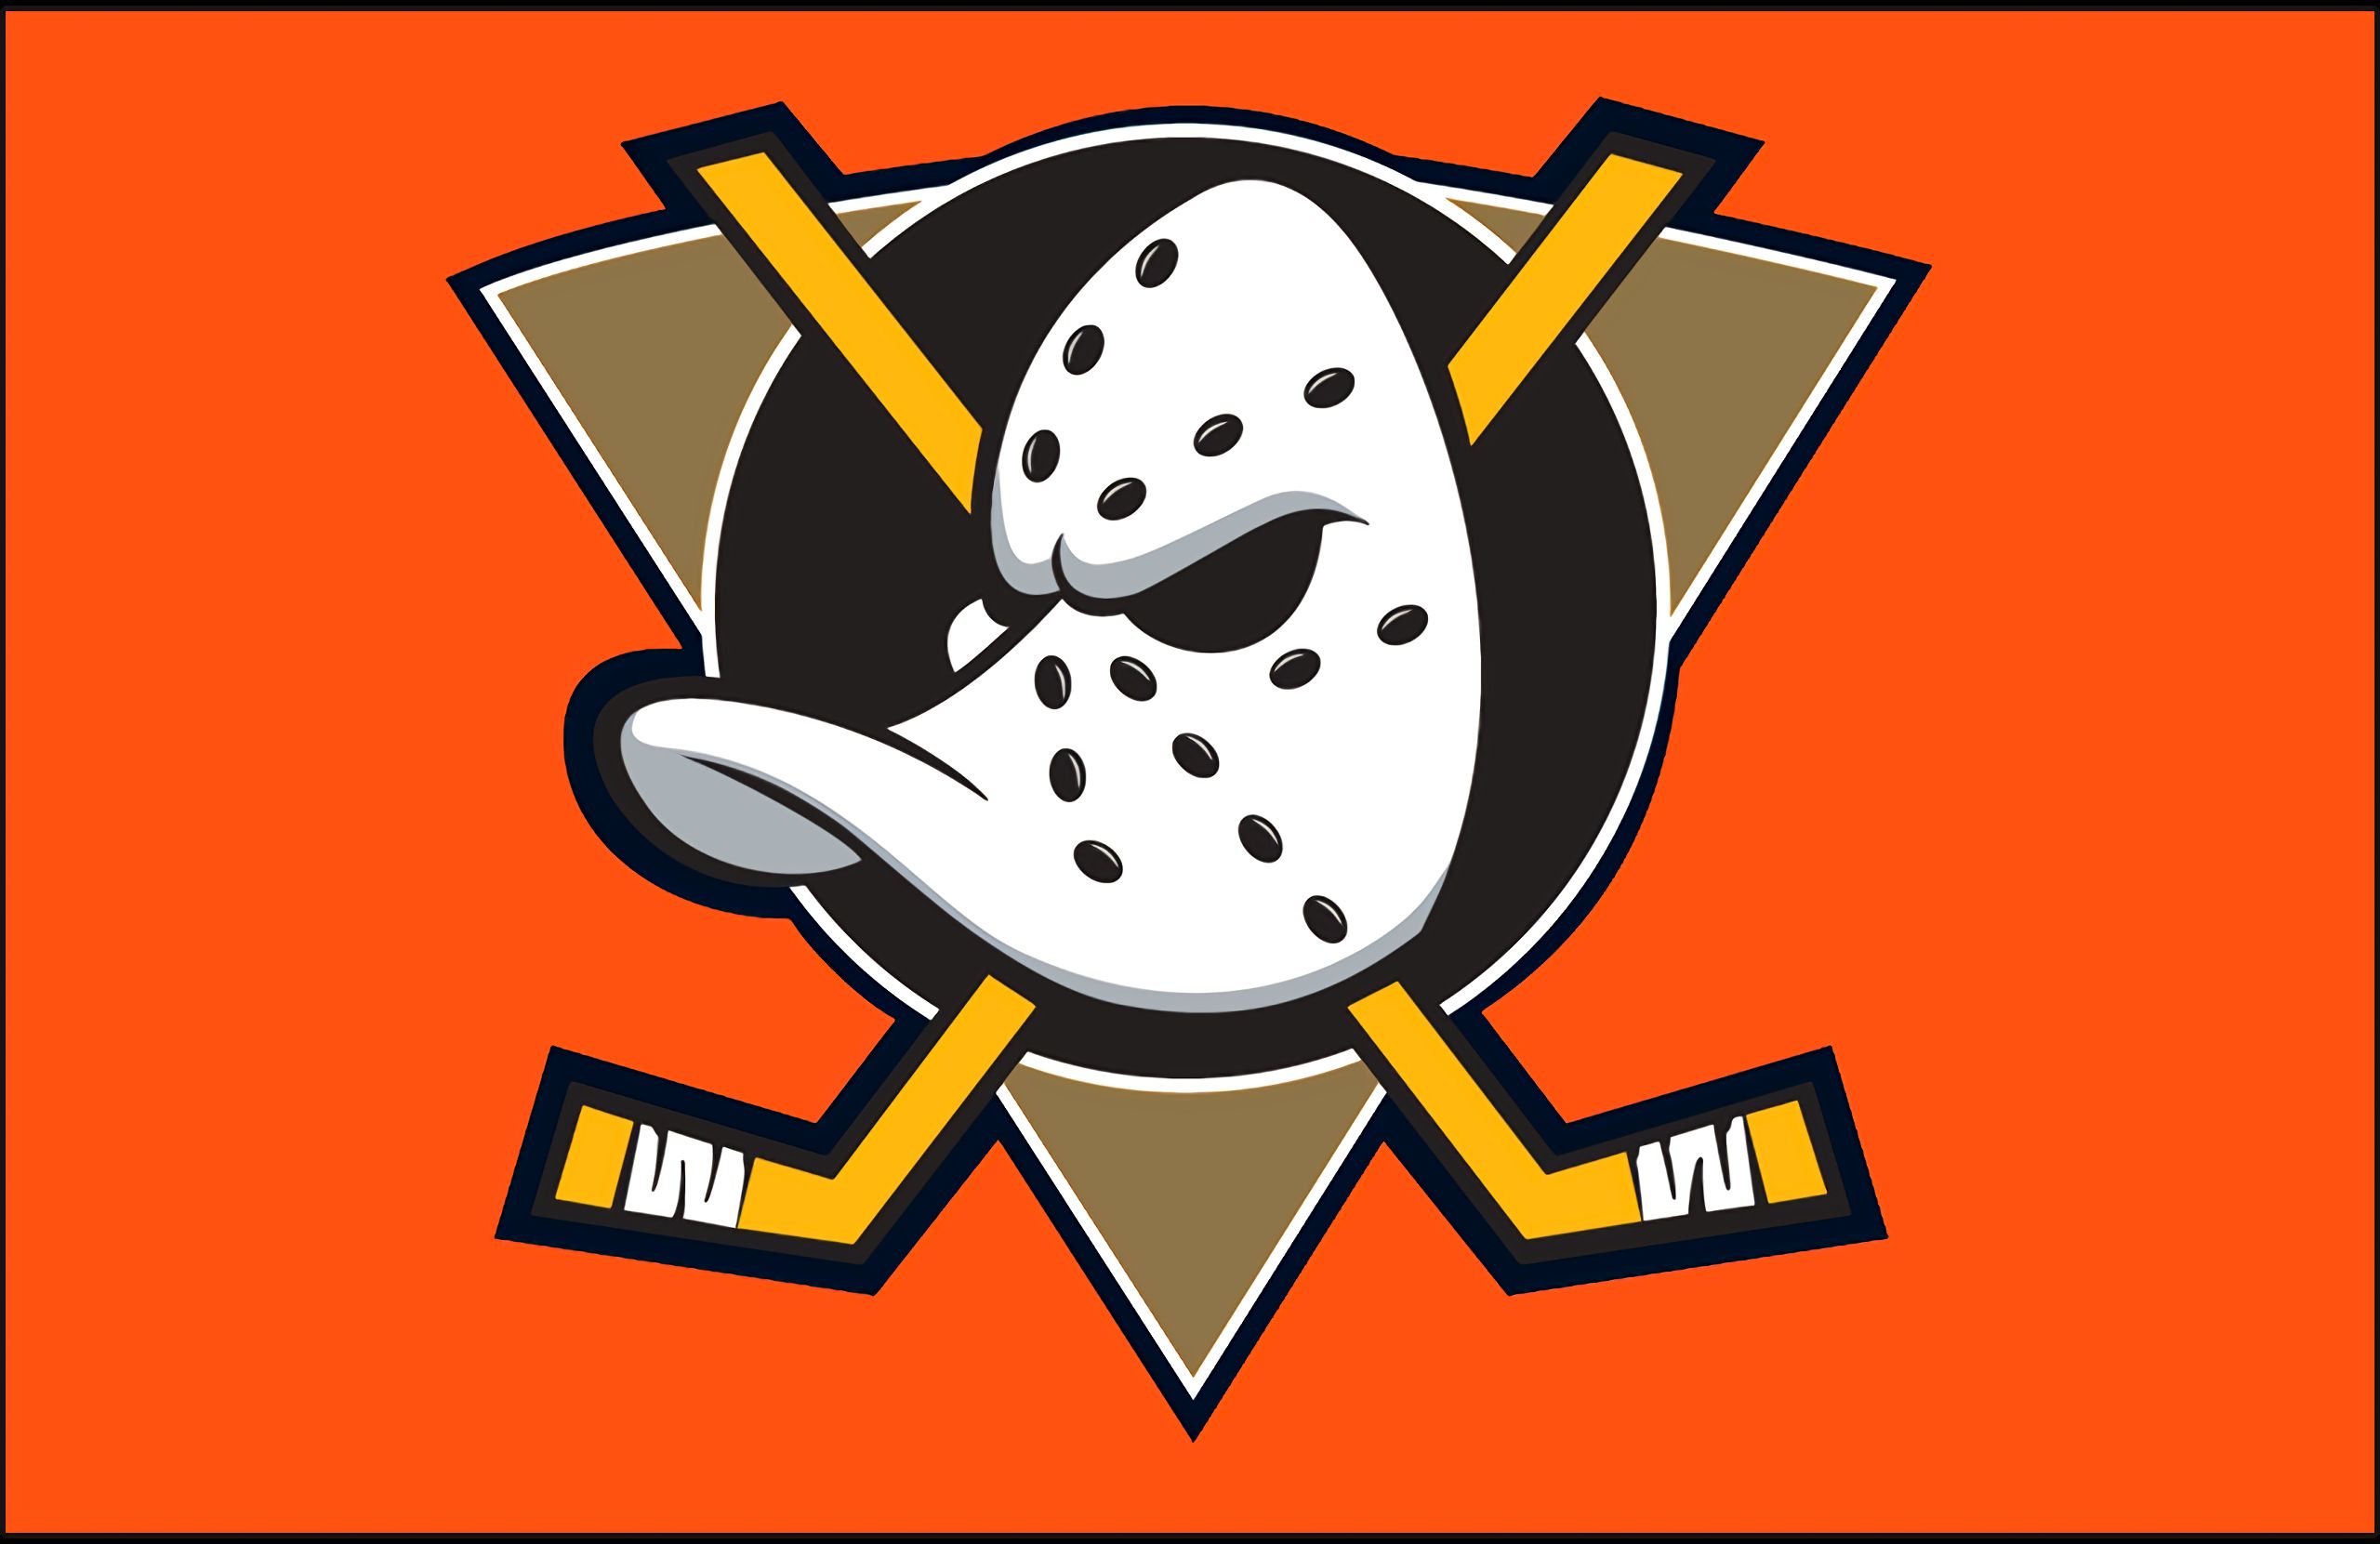 Download wallpapers Anaheim Ducks golden logo NHL black metal  background american hockey team National Hockey League Anaheim Ducks  logo hockey USA for desktop with resolution 2560x1600 High Quality HD  pictures wallpapers